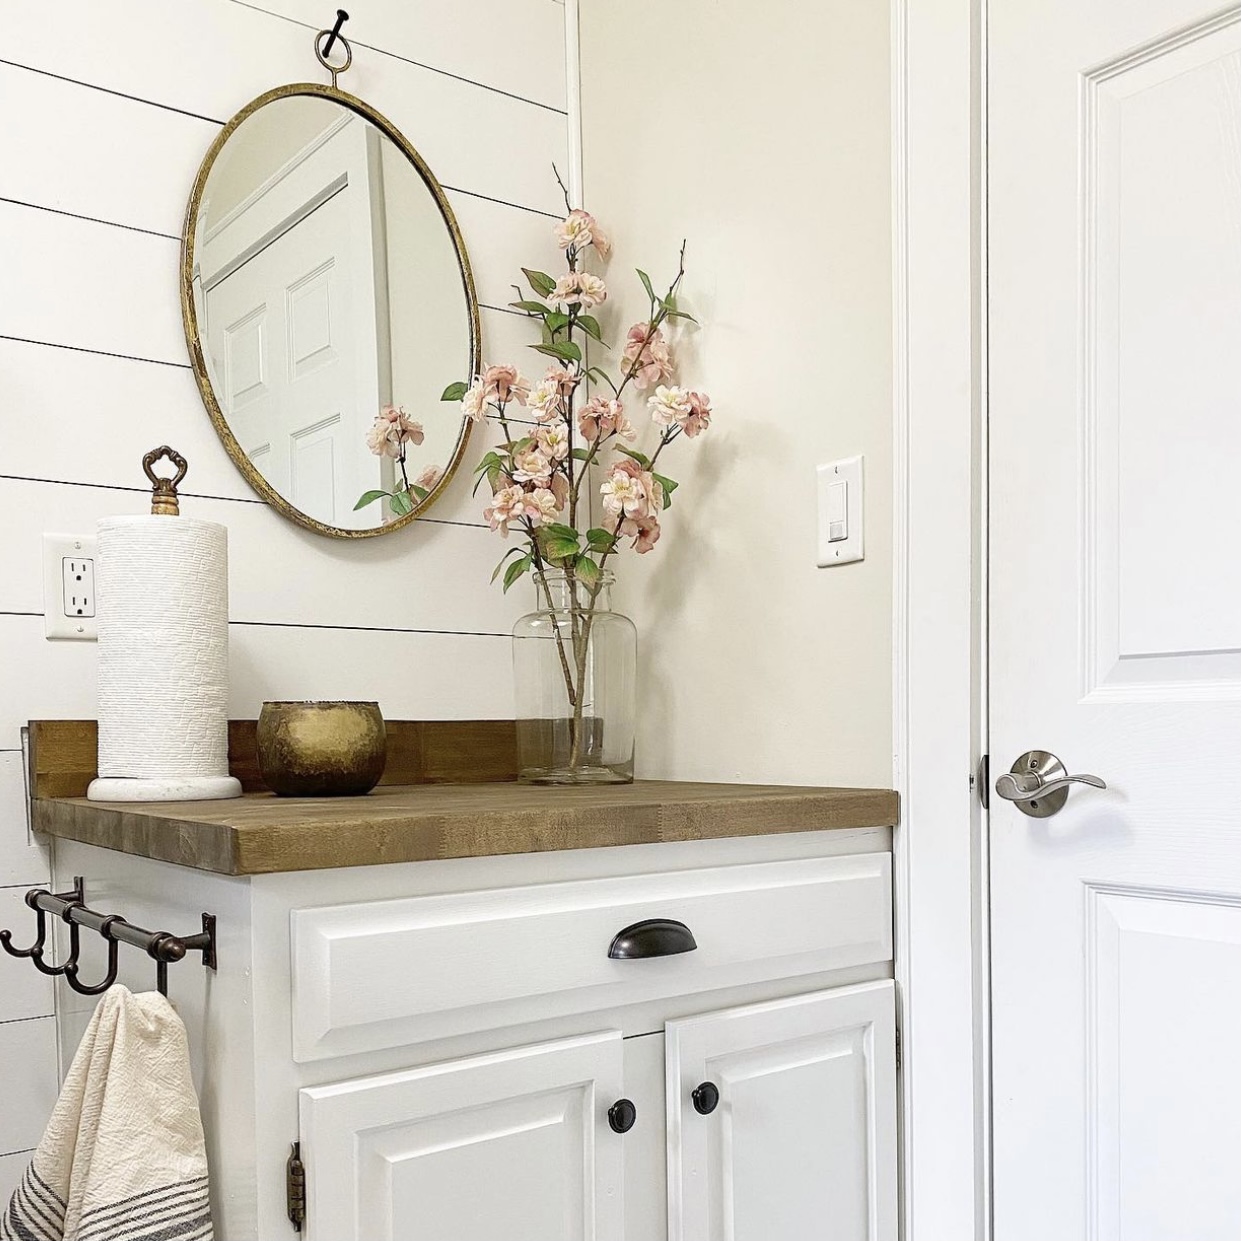 Farmhouse laundry room folding table with a mirror on the wall above it.